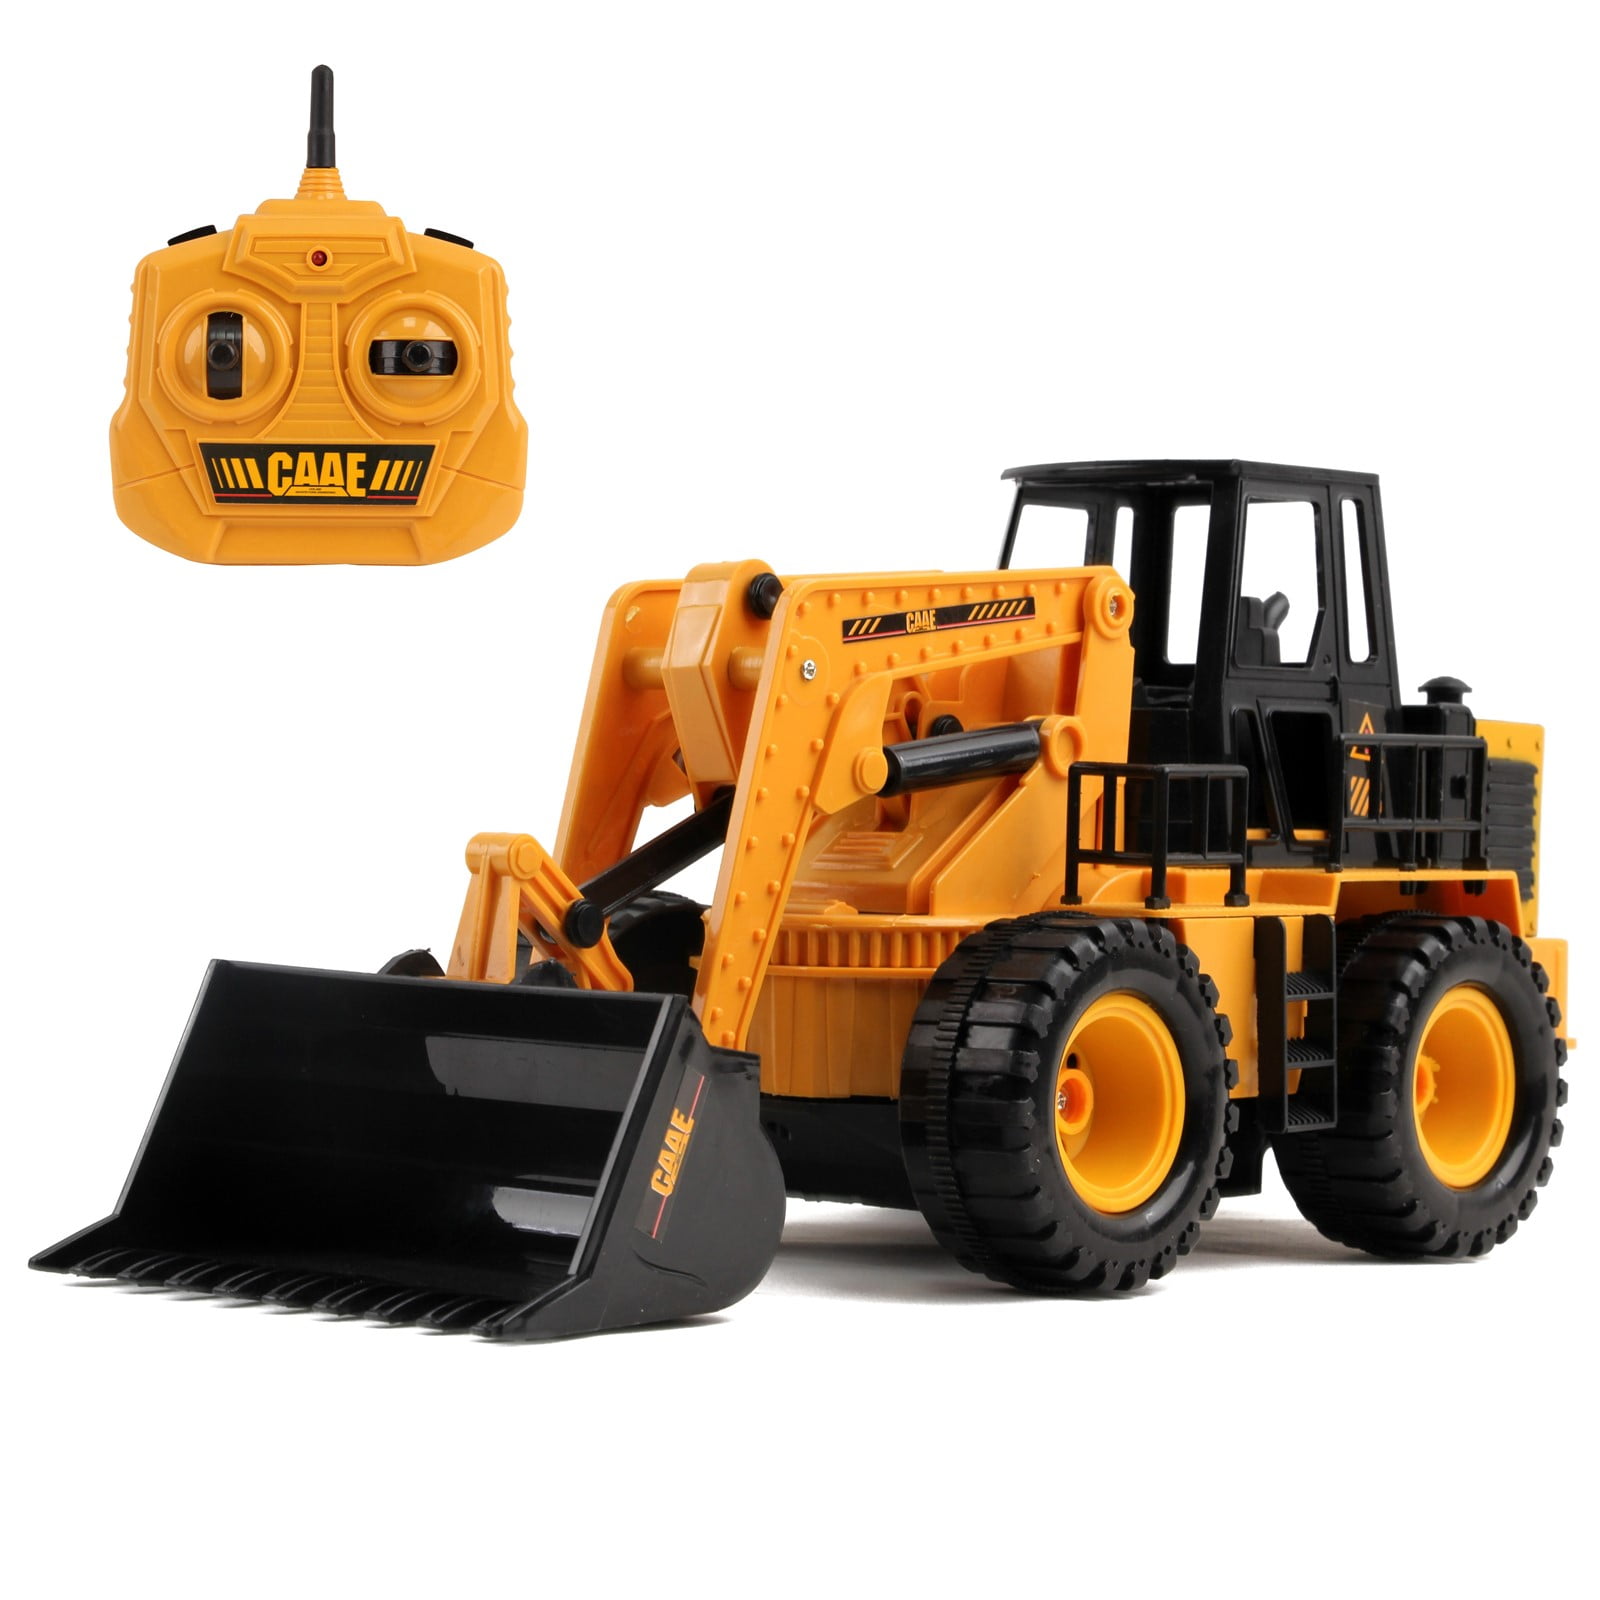 US Remote Control RC Excavator Construction Truck Digger Bulldozer Kids Car Toy 